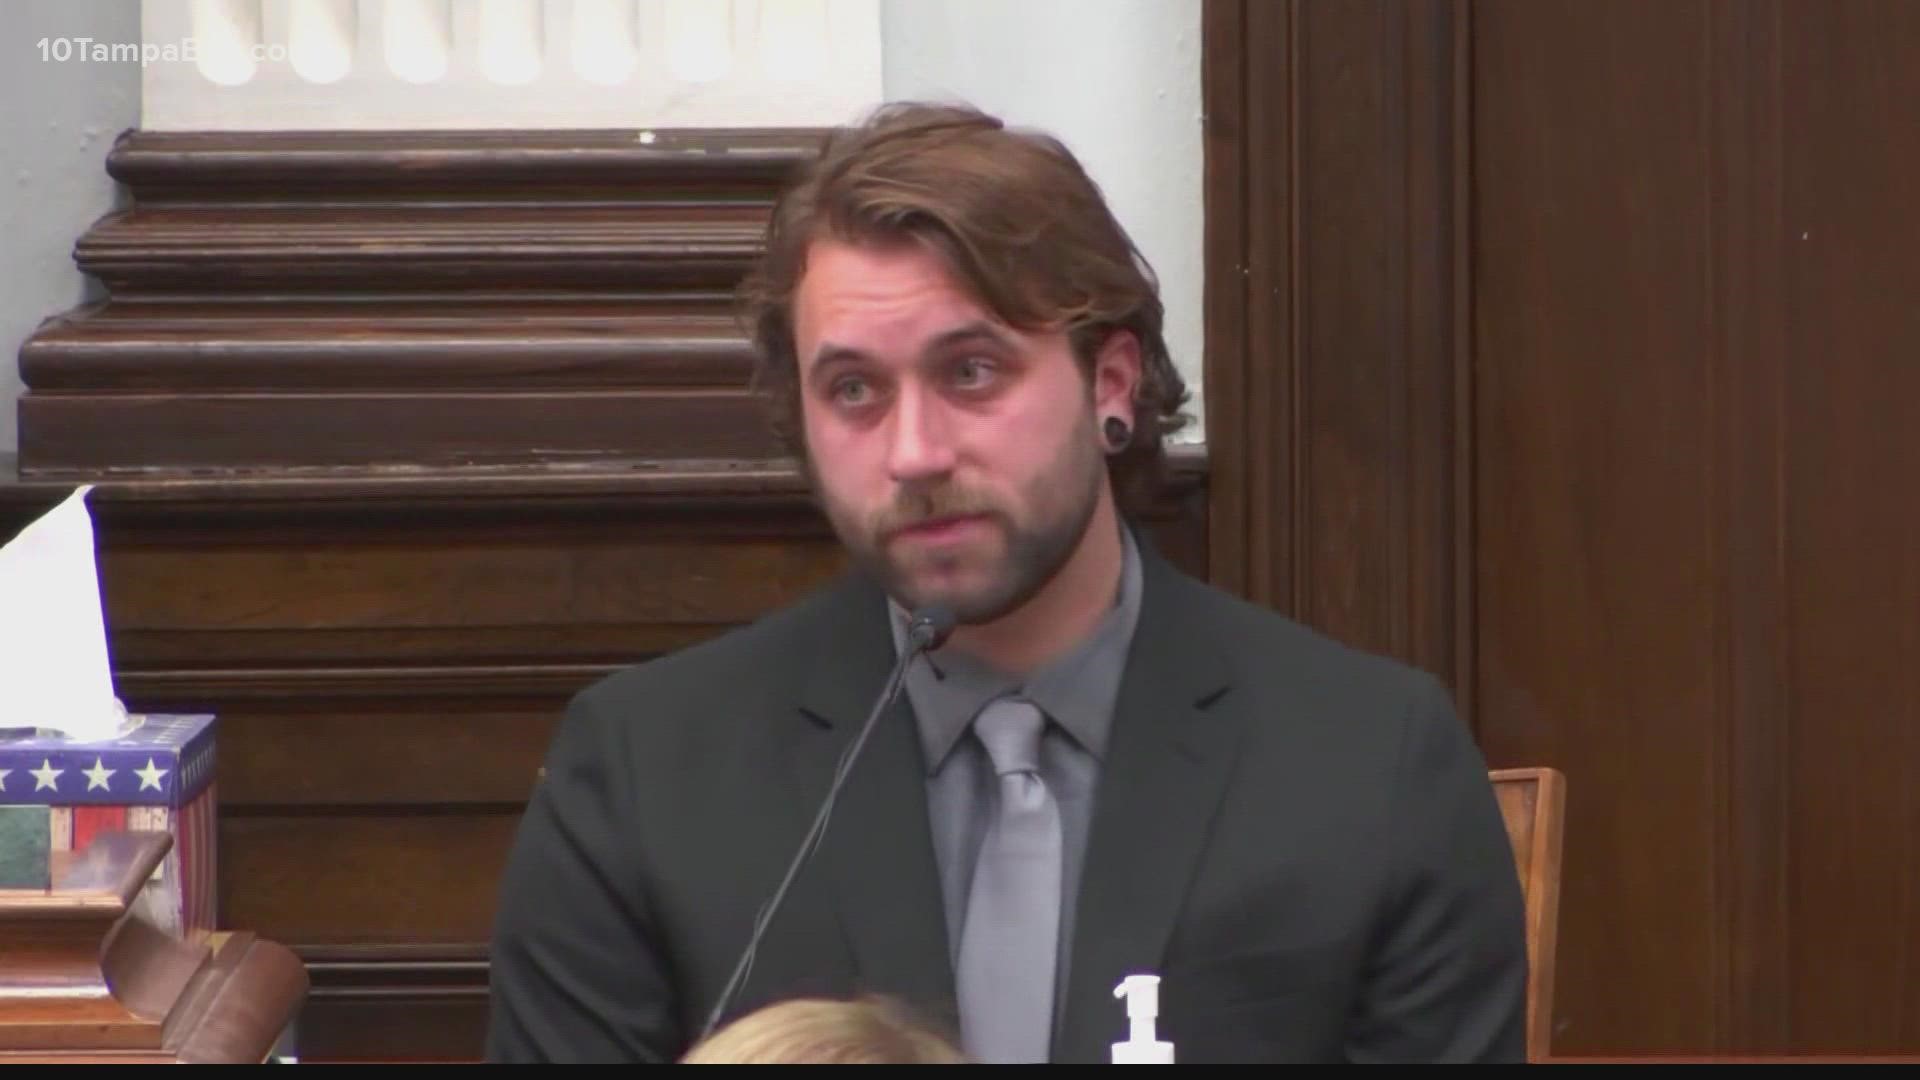 The third and final man shot by Kyle Rittenhouse during a night of turbulent protests in the summer of 2020, took the stand Monday at Rittenhouse's murder trial.